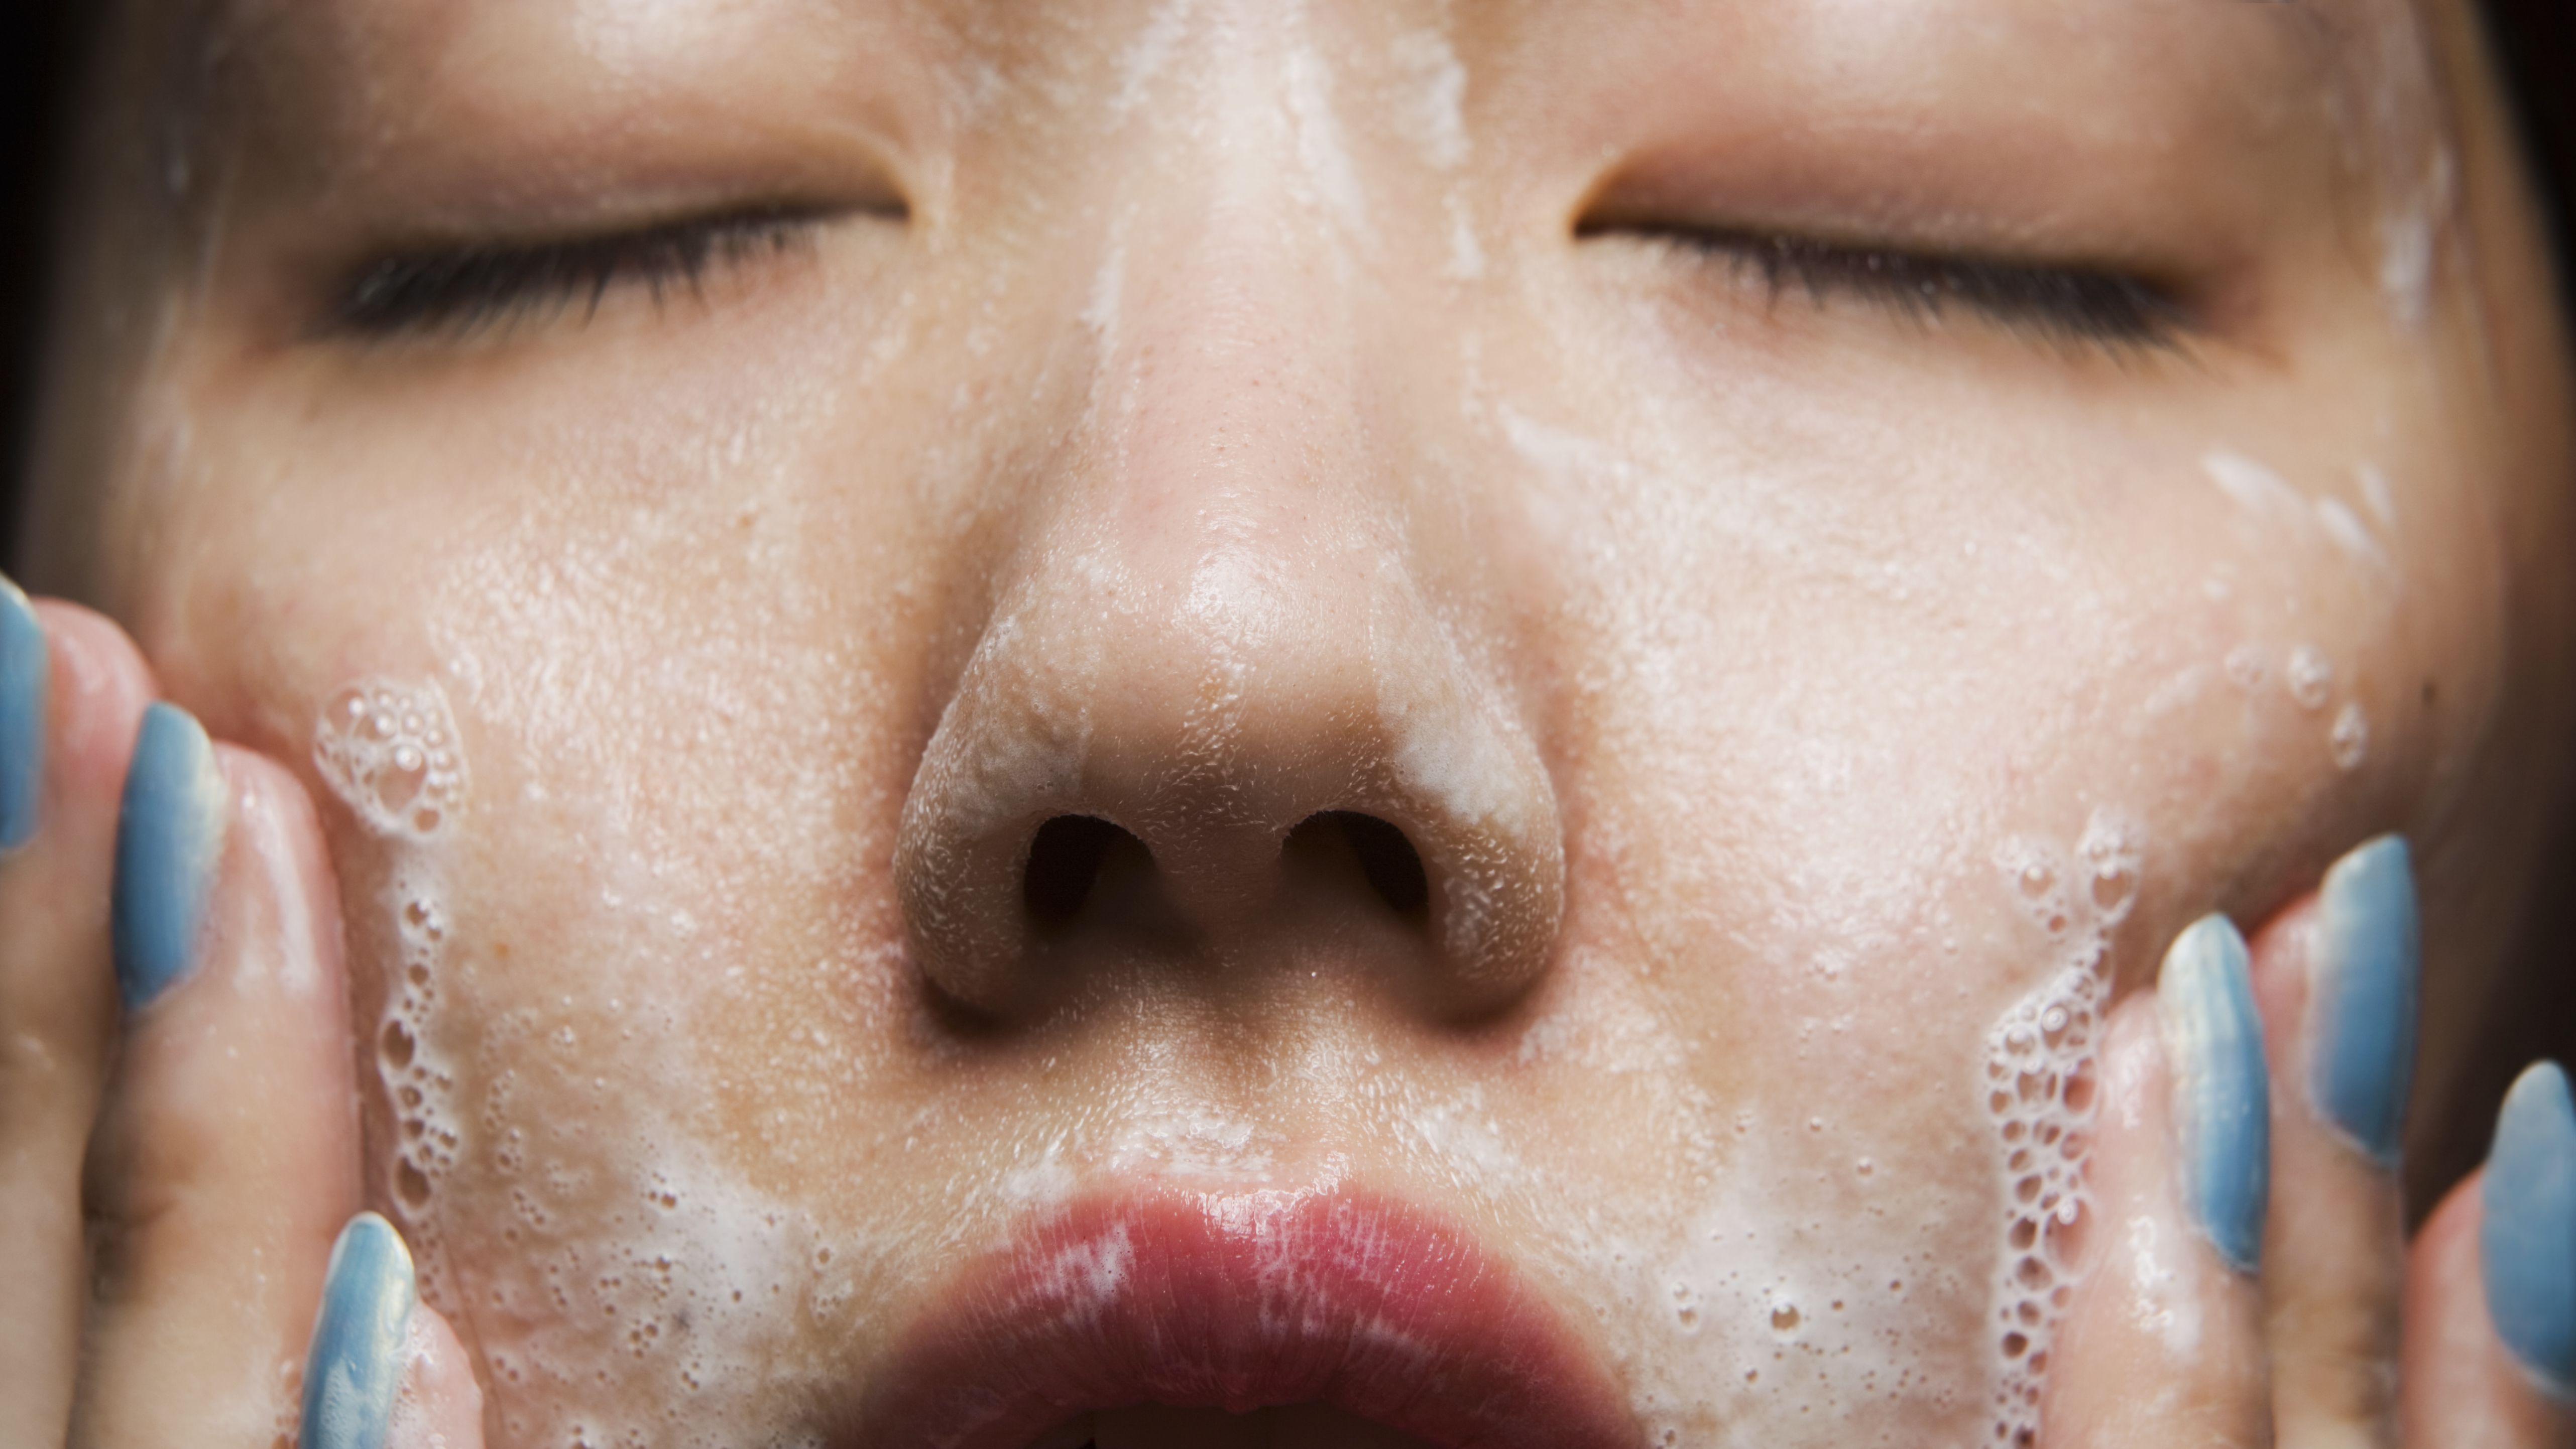 How To Wash Your Face Tips for Facial Cleansing From Experts Marie Claire pic